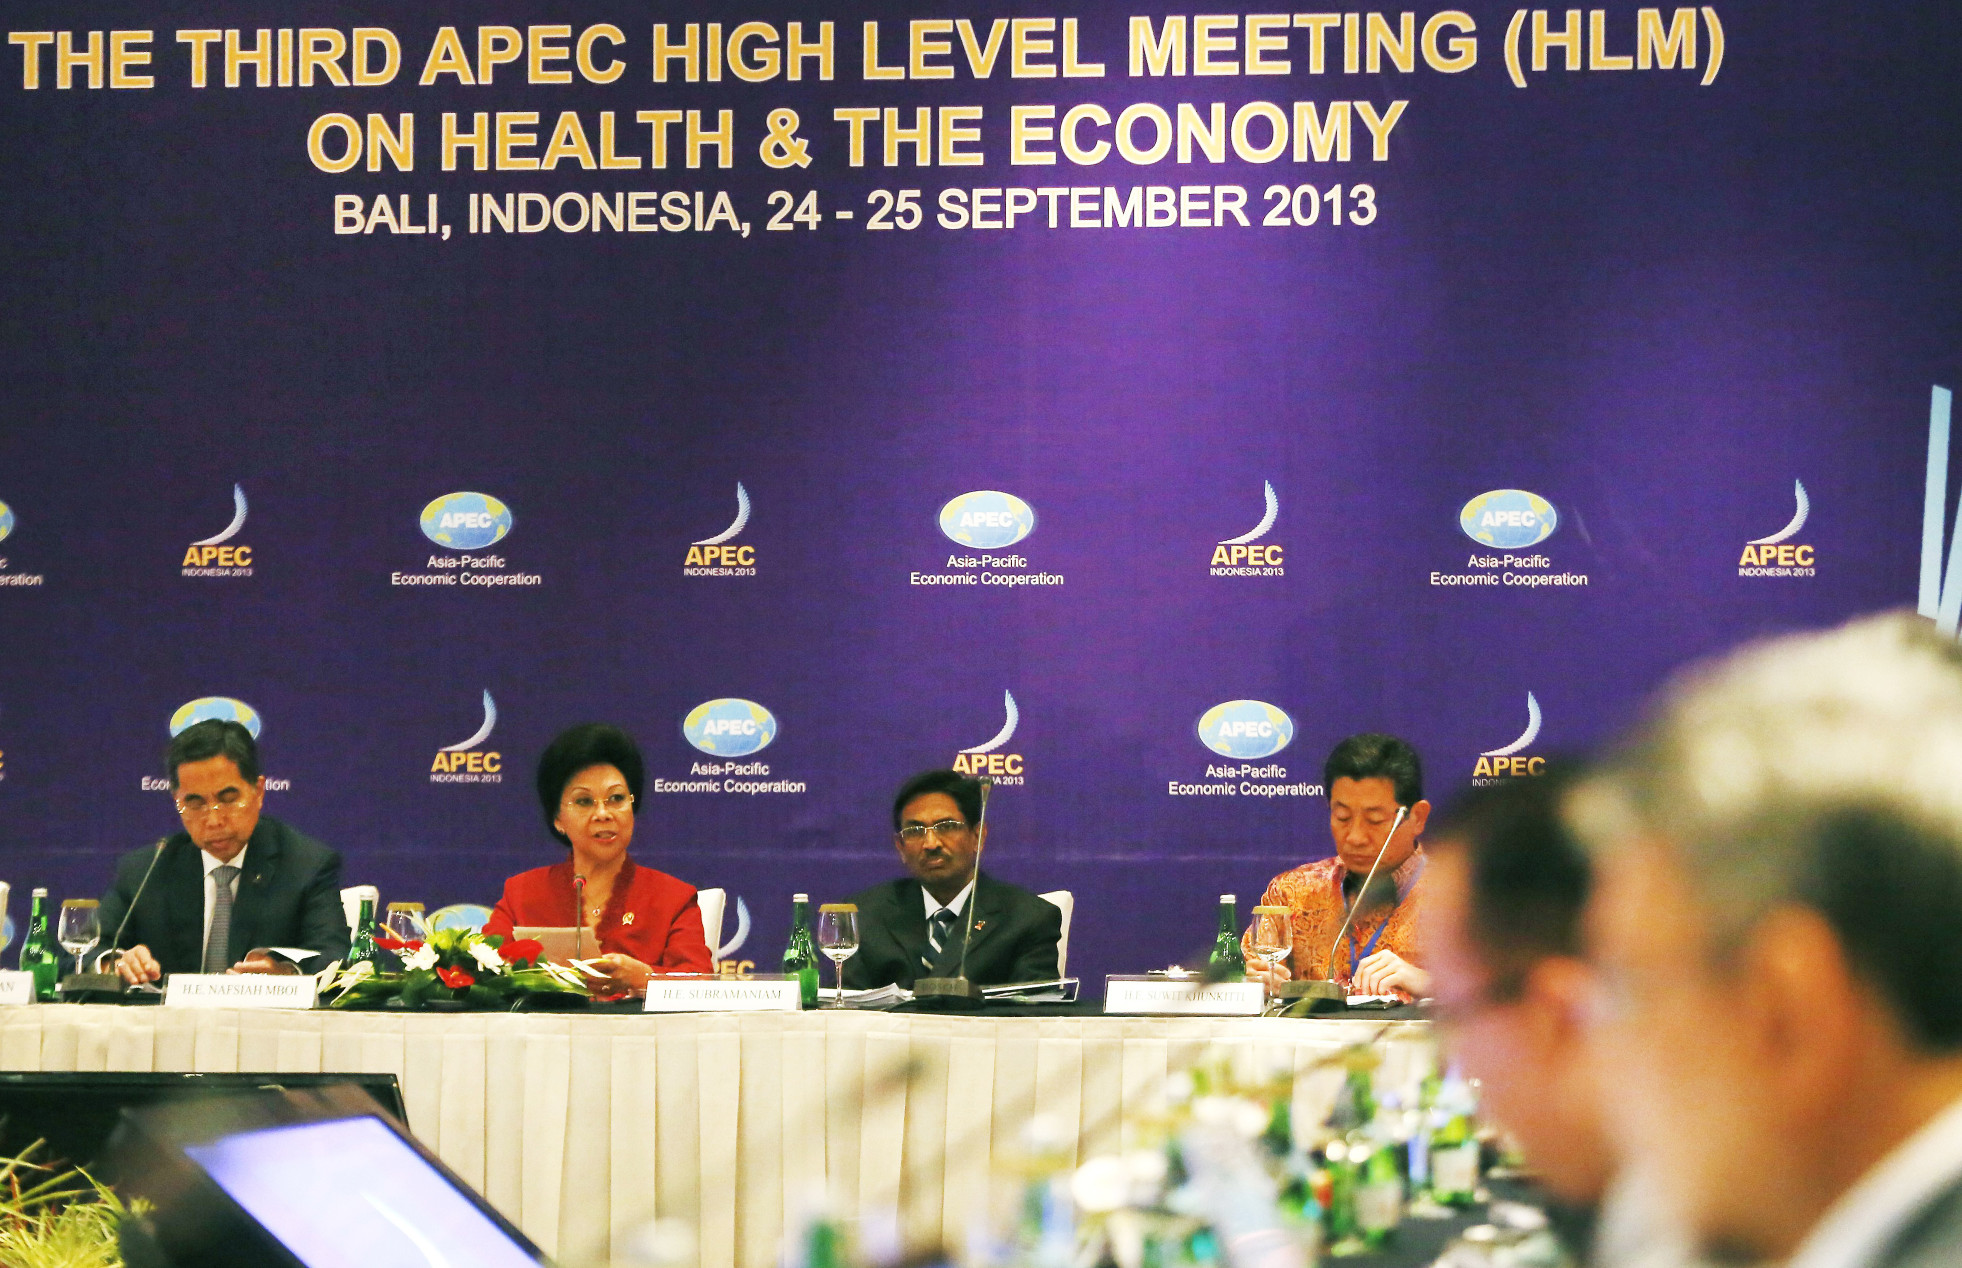 Indonesia Health Minister Nafsiah Mboi (second left) delivers a speech at the opening of the Apec High Level Meeting on Health and The Economy in Nusadua, Bali. Photo: EPA